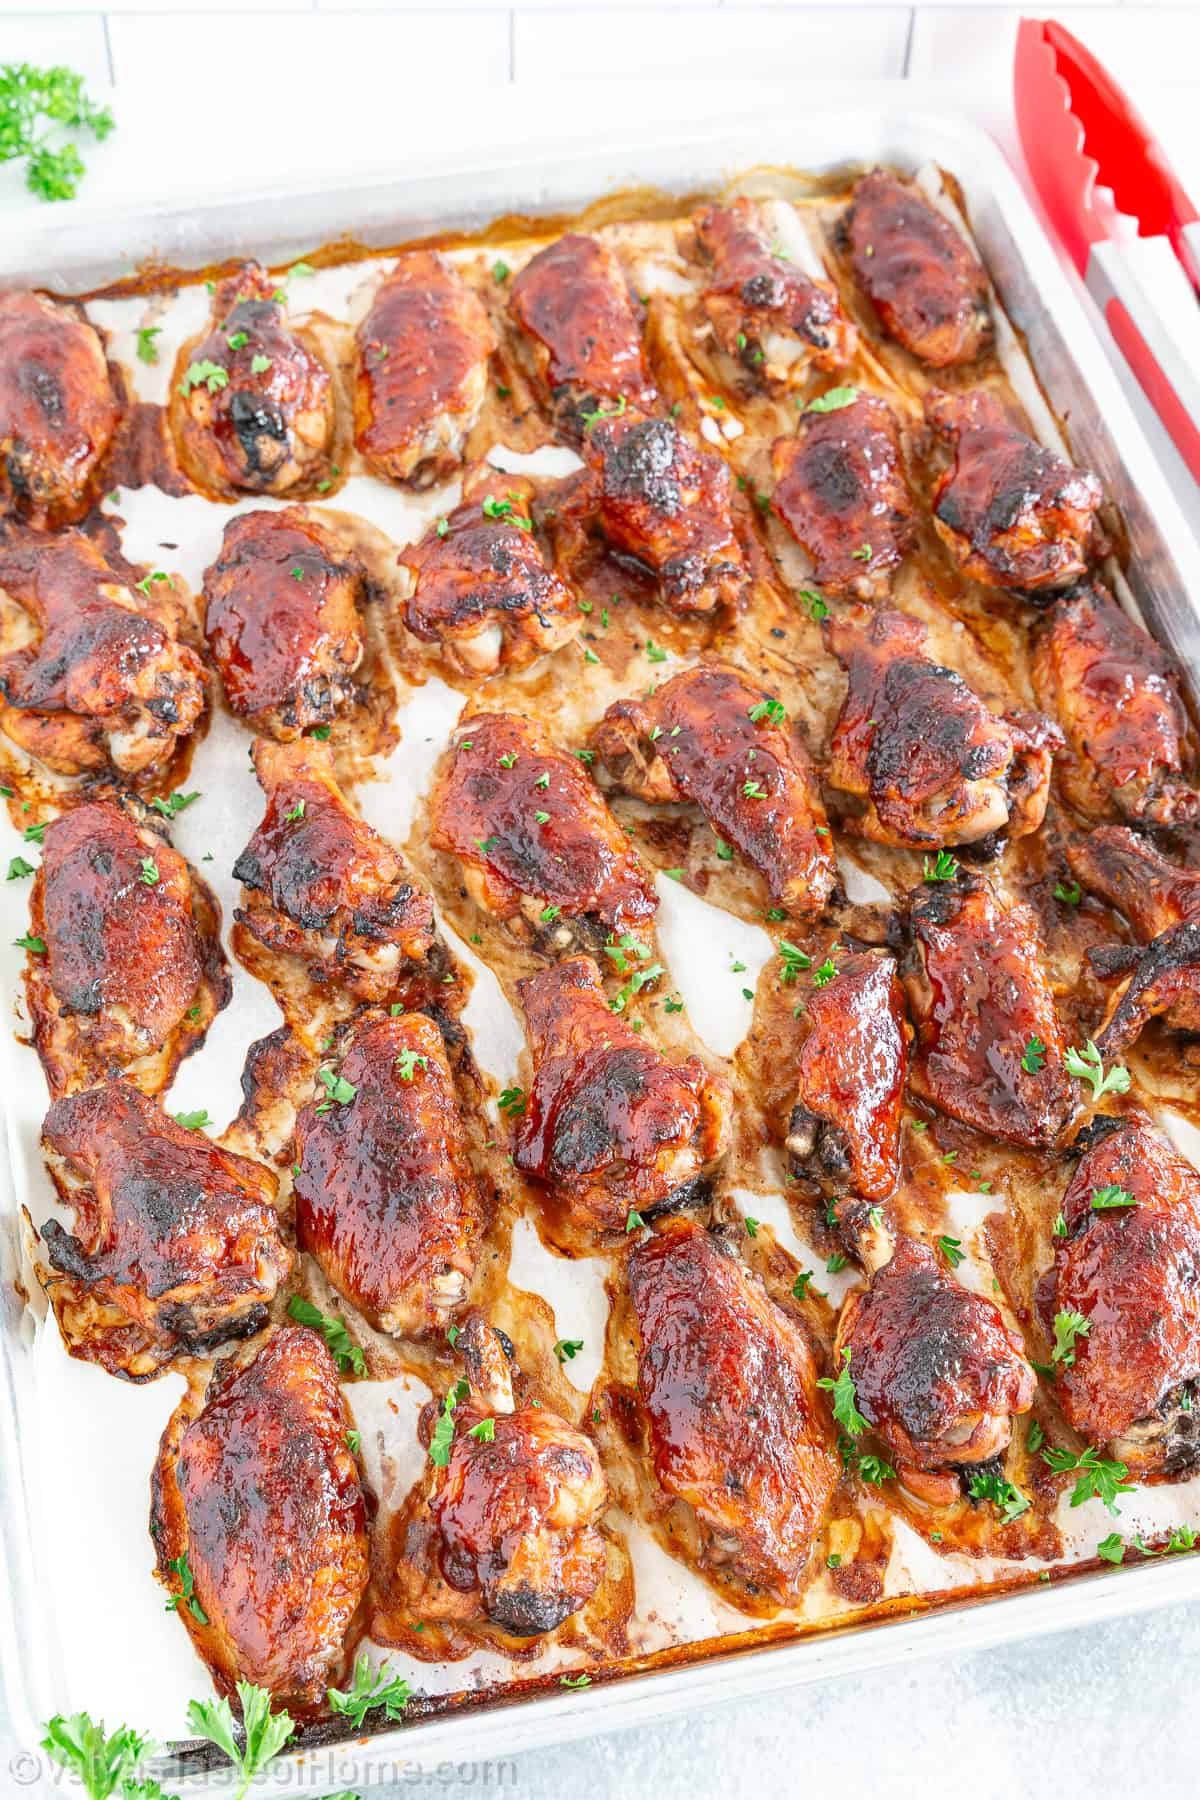 These juicy BBQ chicken wings are a real treat. Packed with flavor thanks to a perfectly balanced blend of spices and a delicious tangy BBQ glaze, they're a guaranteed crowd-pleaser at any gathering.